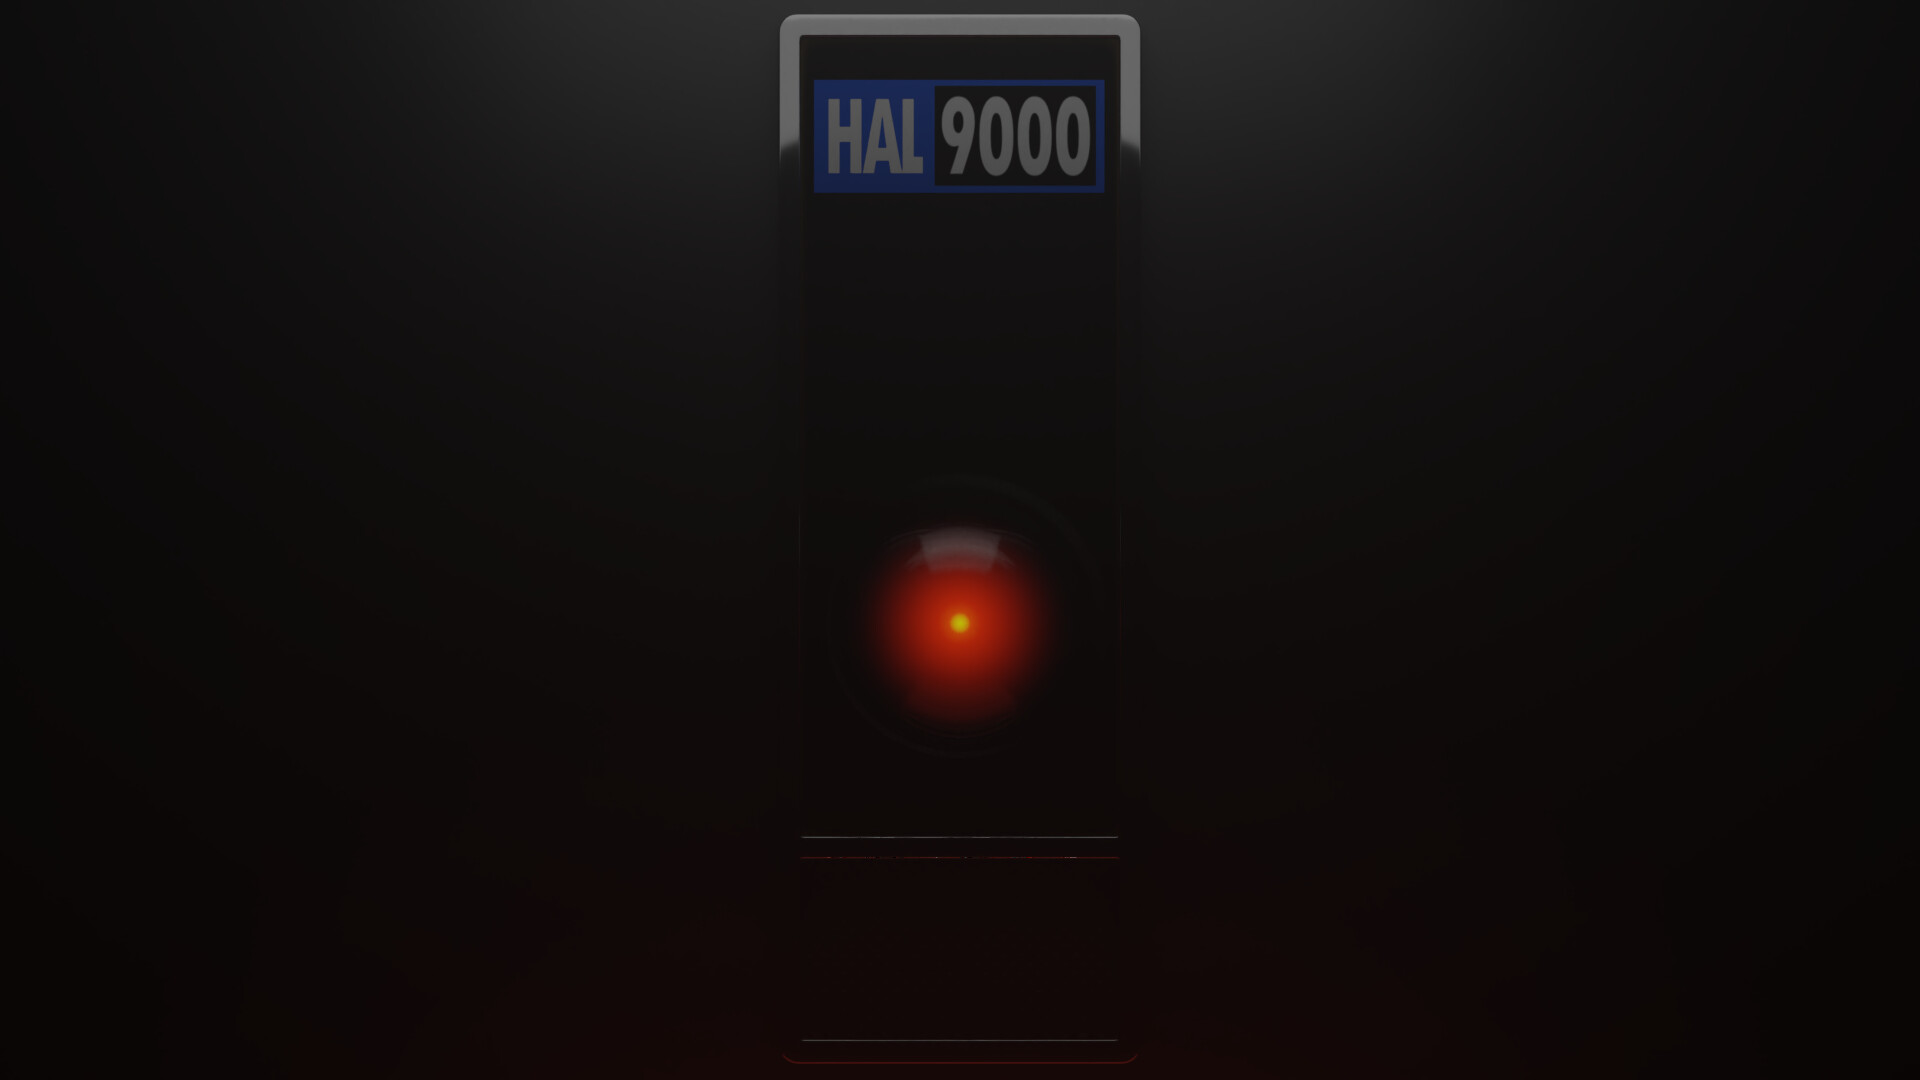 HD wallpaper: Movie, 2001: A Space Odyssey, communication, illuminated,  sign | Wallpaper Flare